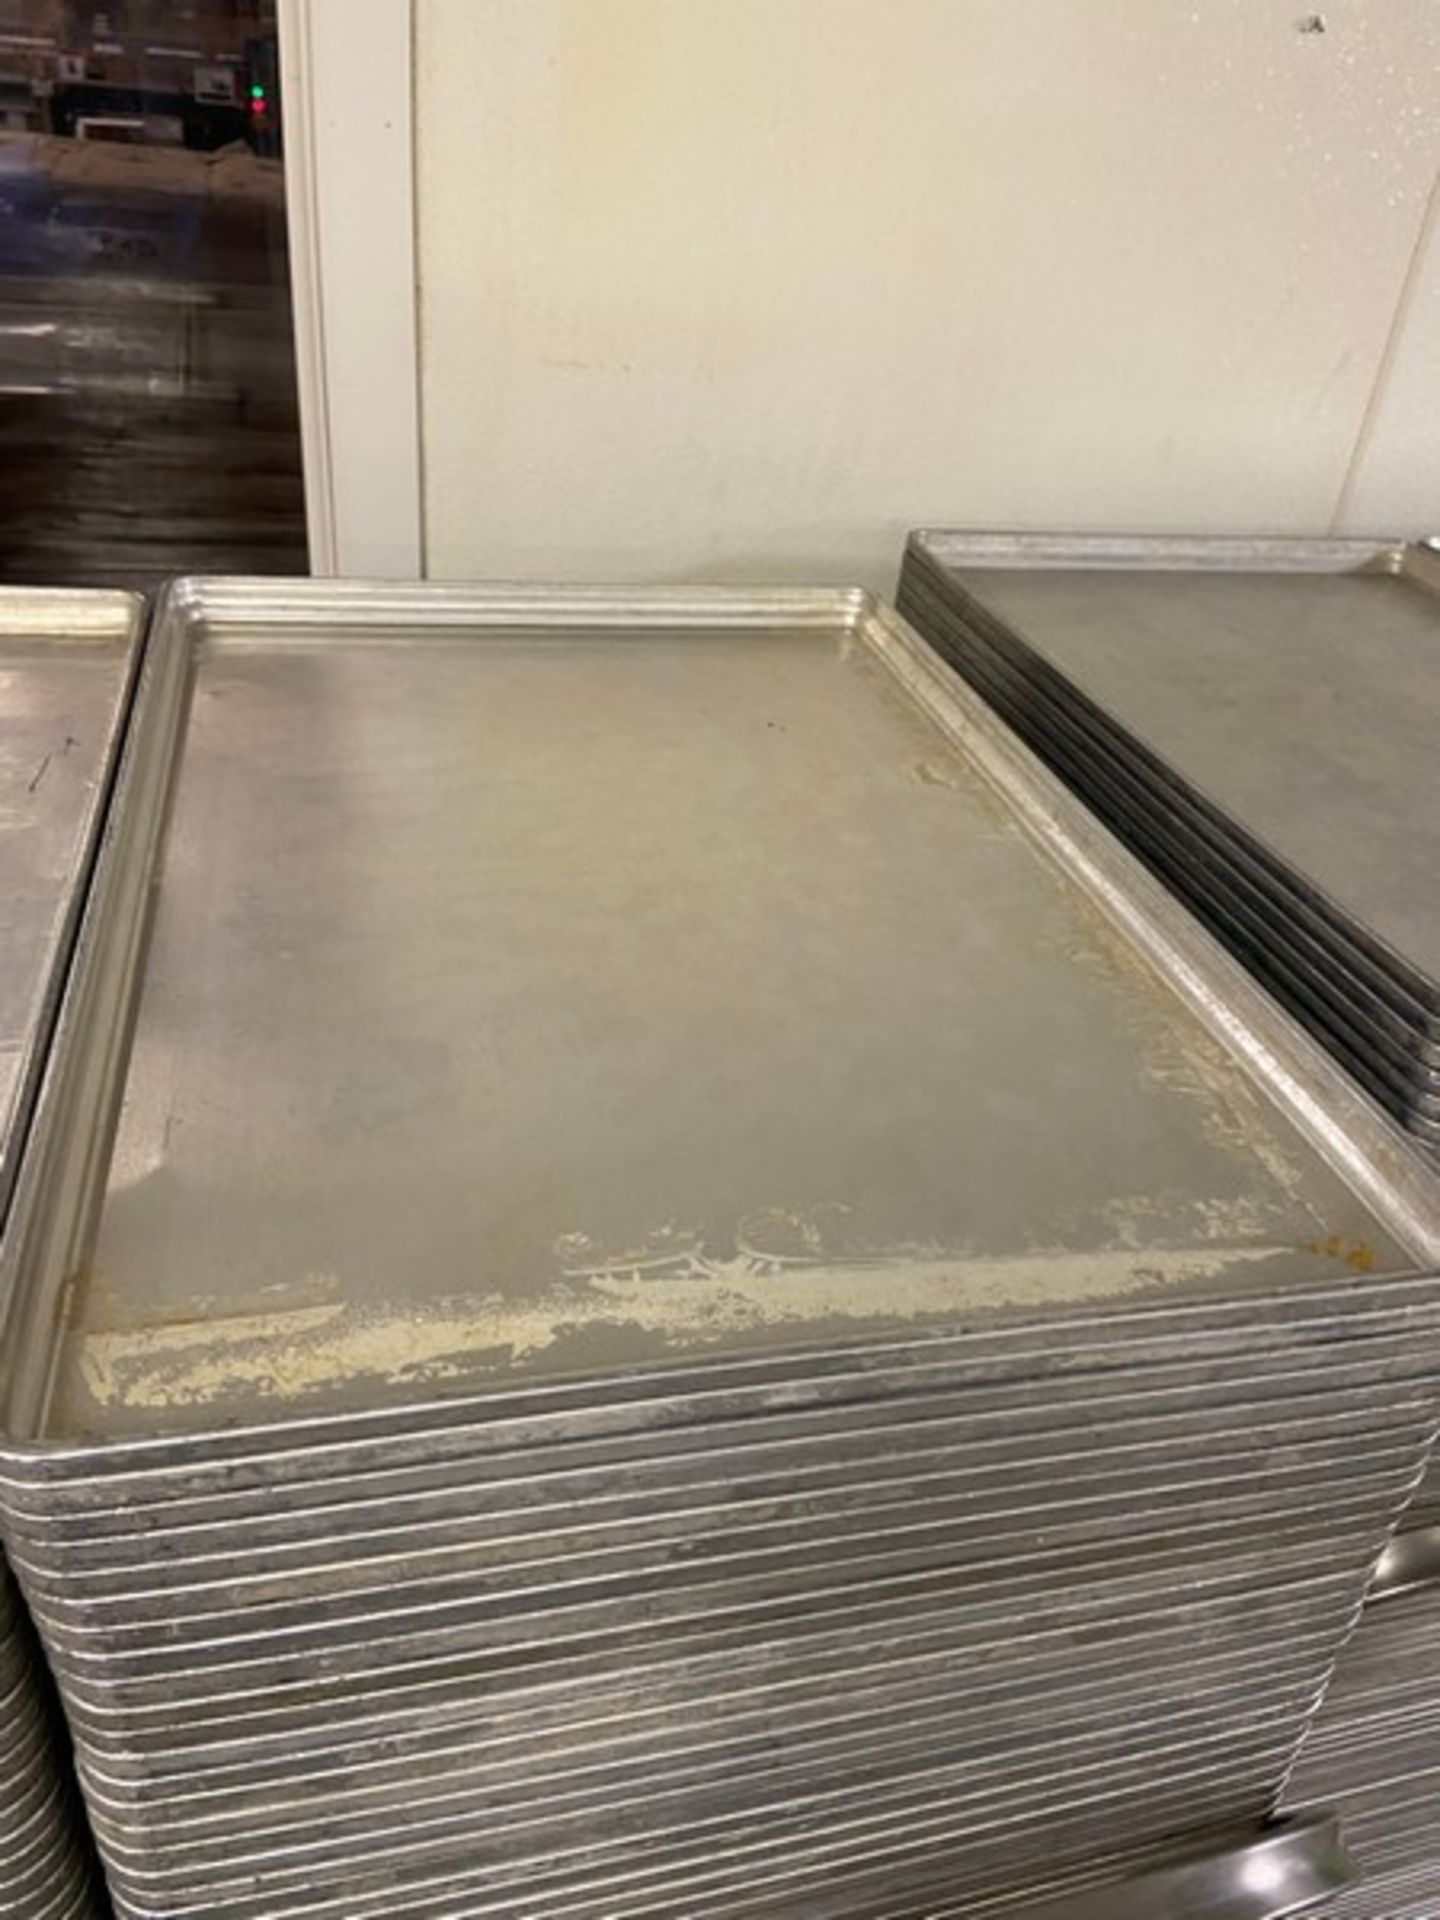 (230) BAKING SHEET PANS, INTERAL DIMS.: APROX. 26” L x 18” W x 1” H, ON S/S PORTABLE PAN CART ( - Image 4 of 4